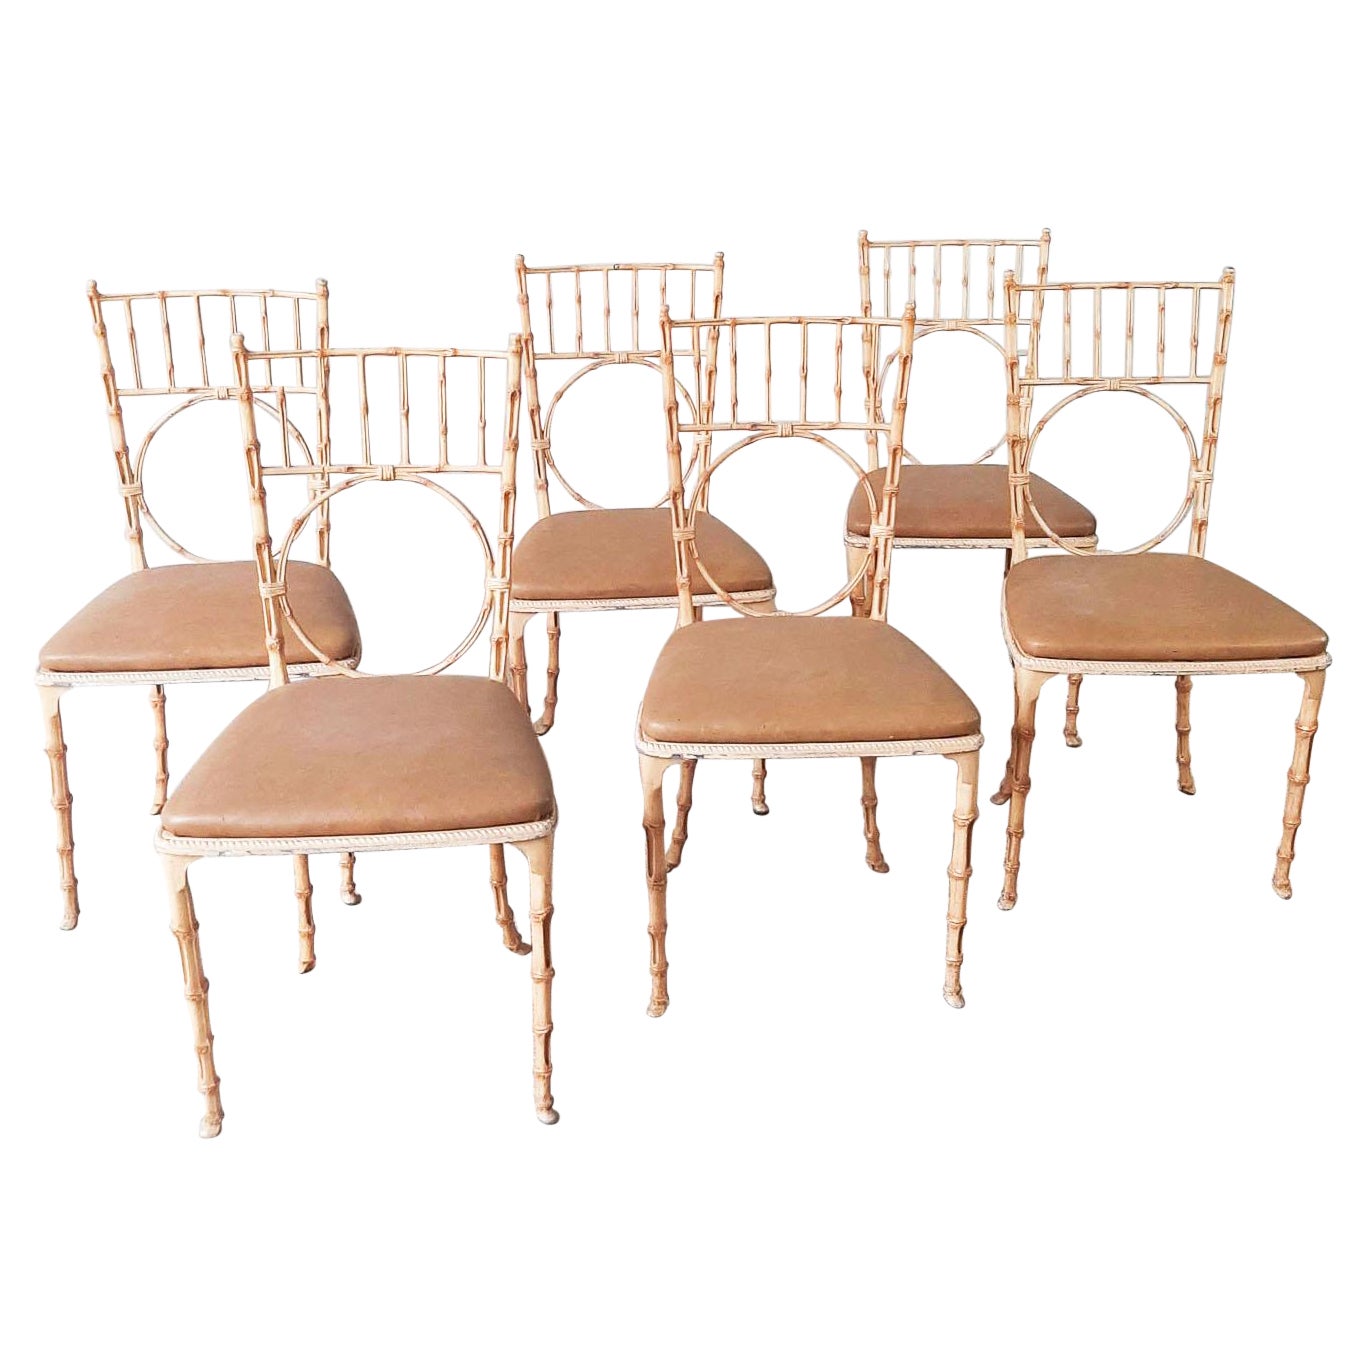 Set of 6 Midcentury Faux Bamboo Aluminium Painted Dining Chairs, 1950s For Sale